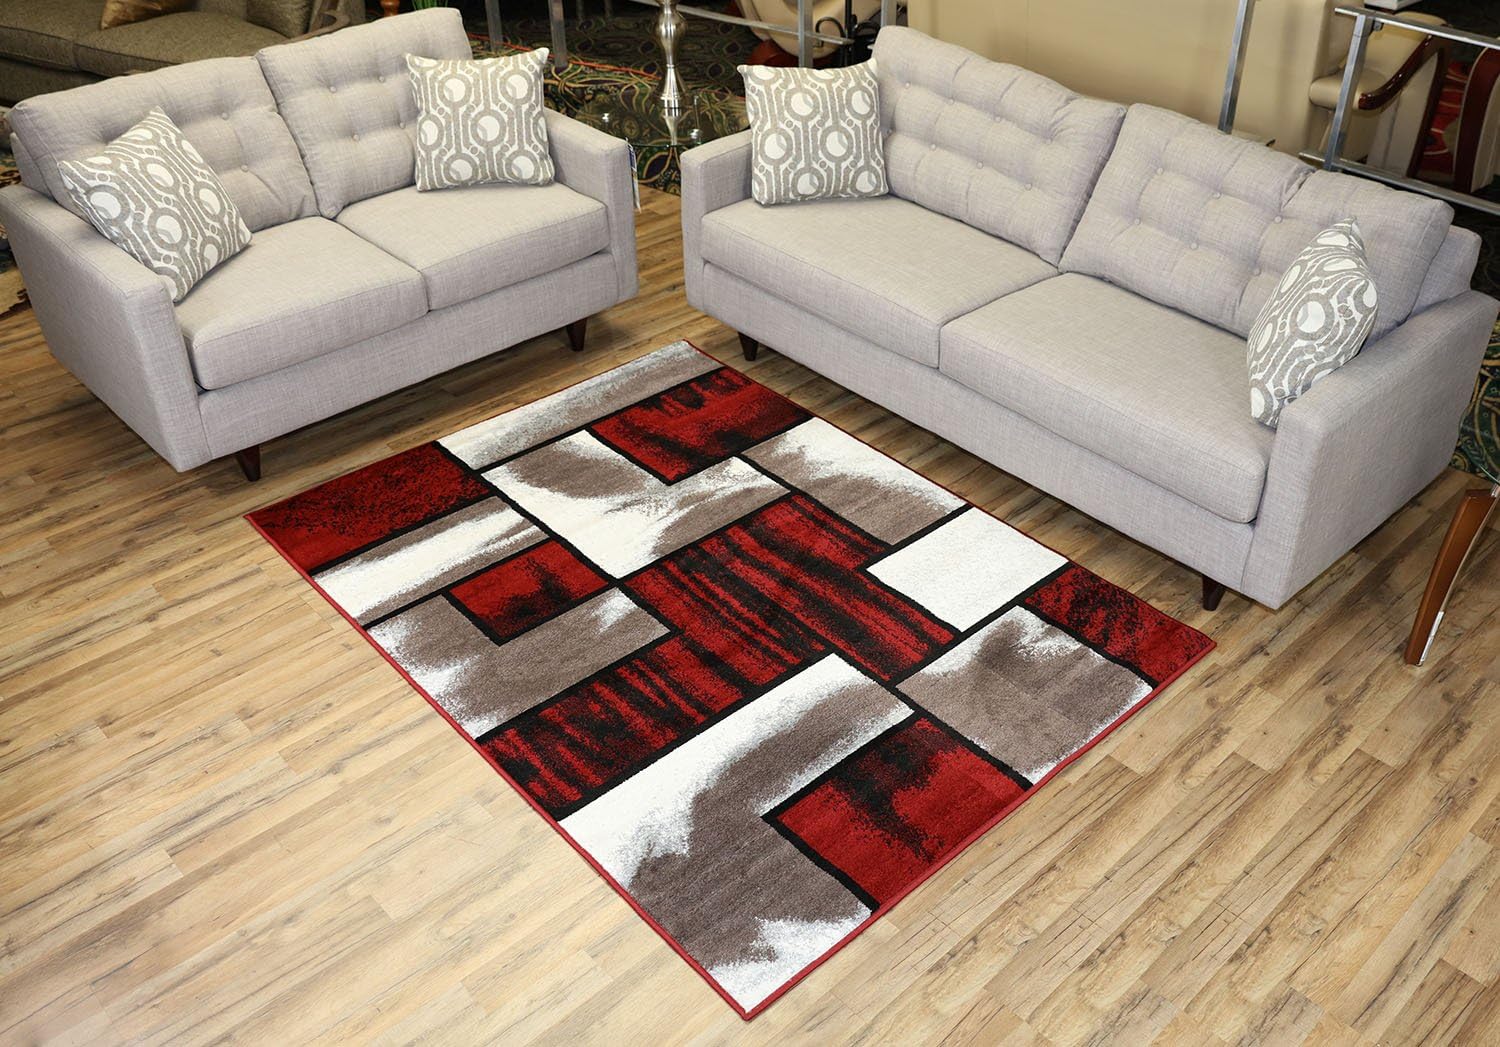 Comfy Collection Squares Contemporary Geometric Design Area Rug (Red/Cappuccino, 4'11" x 6'11")